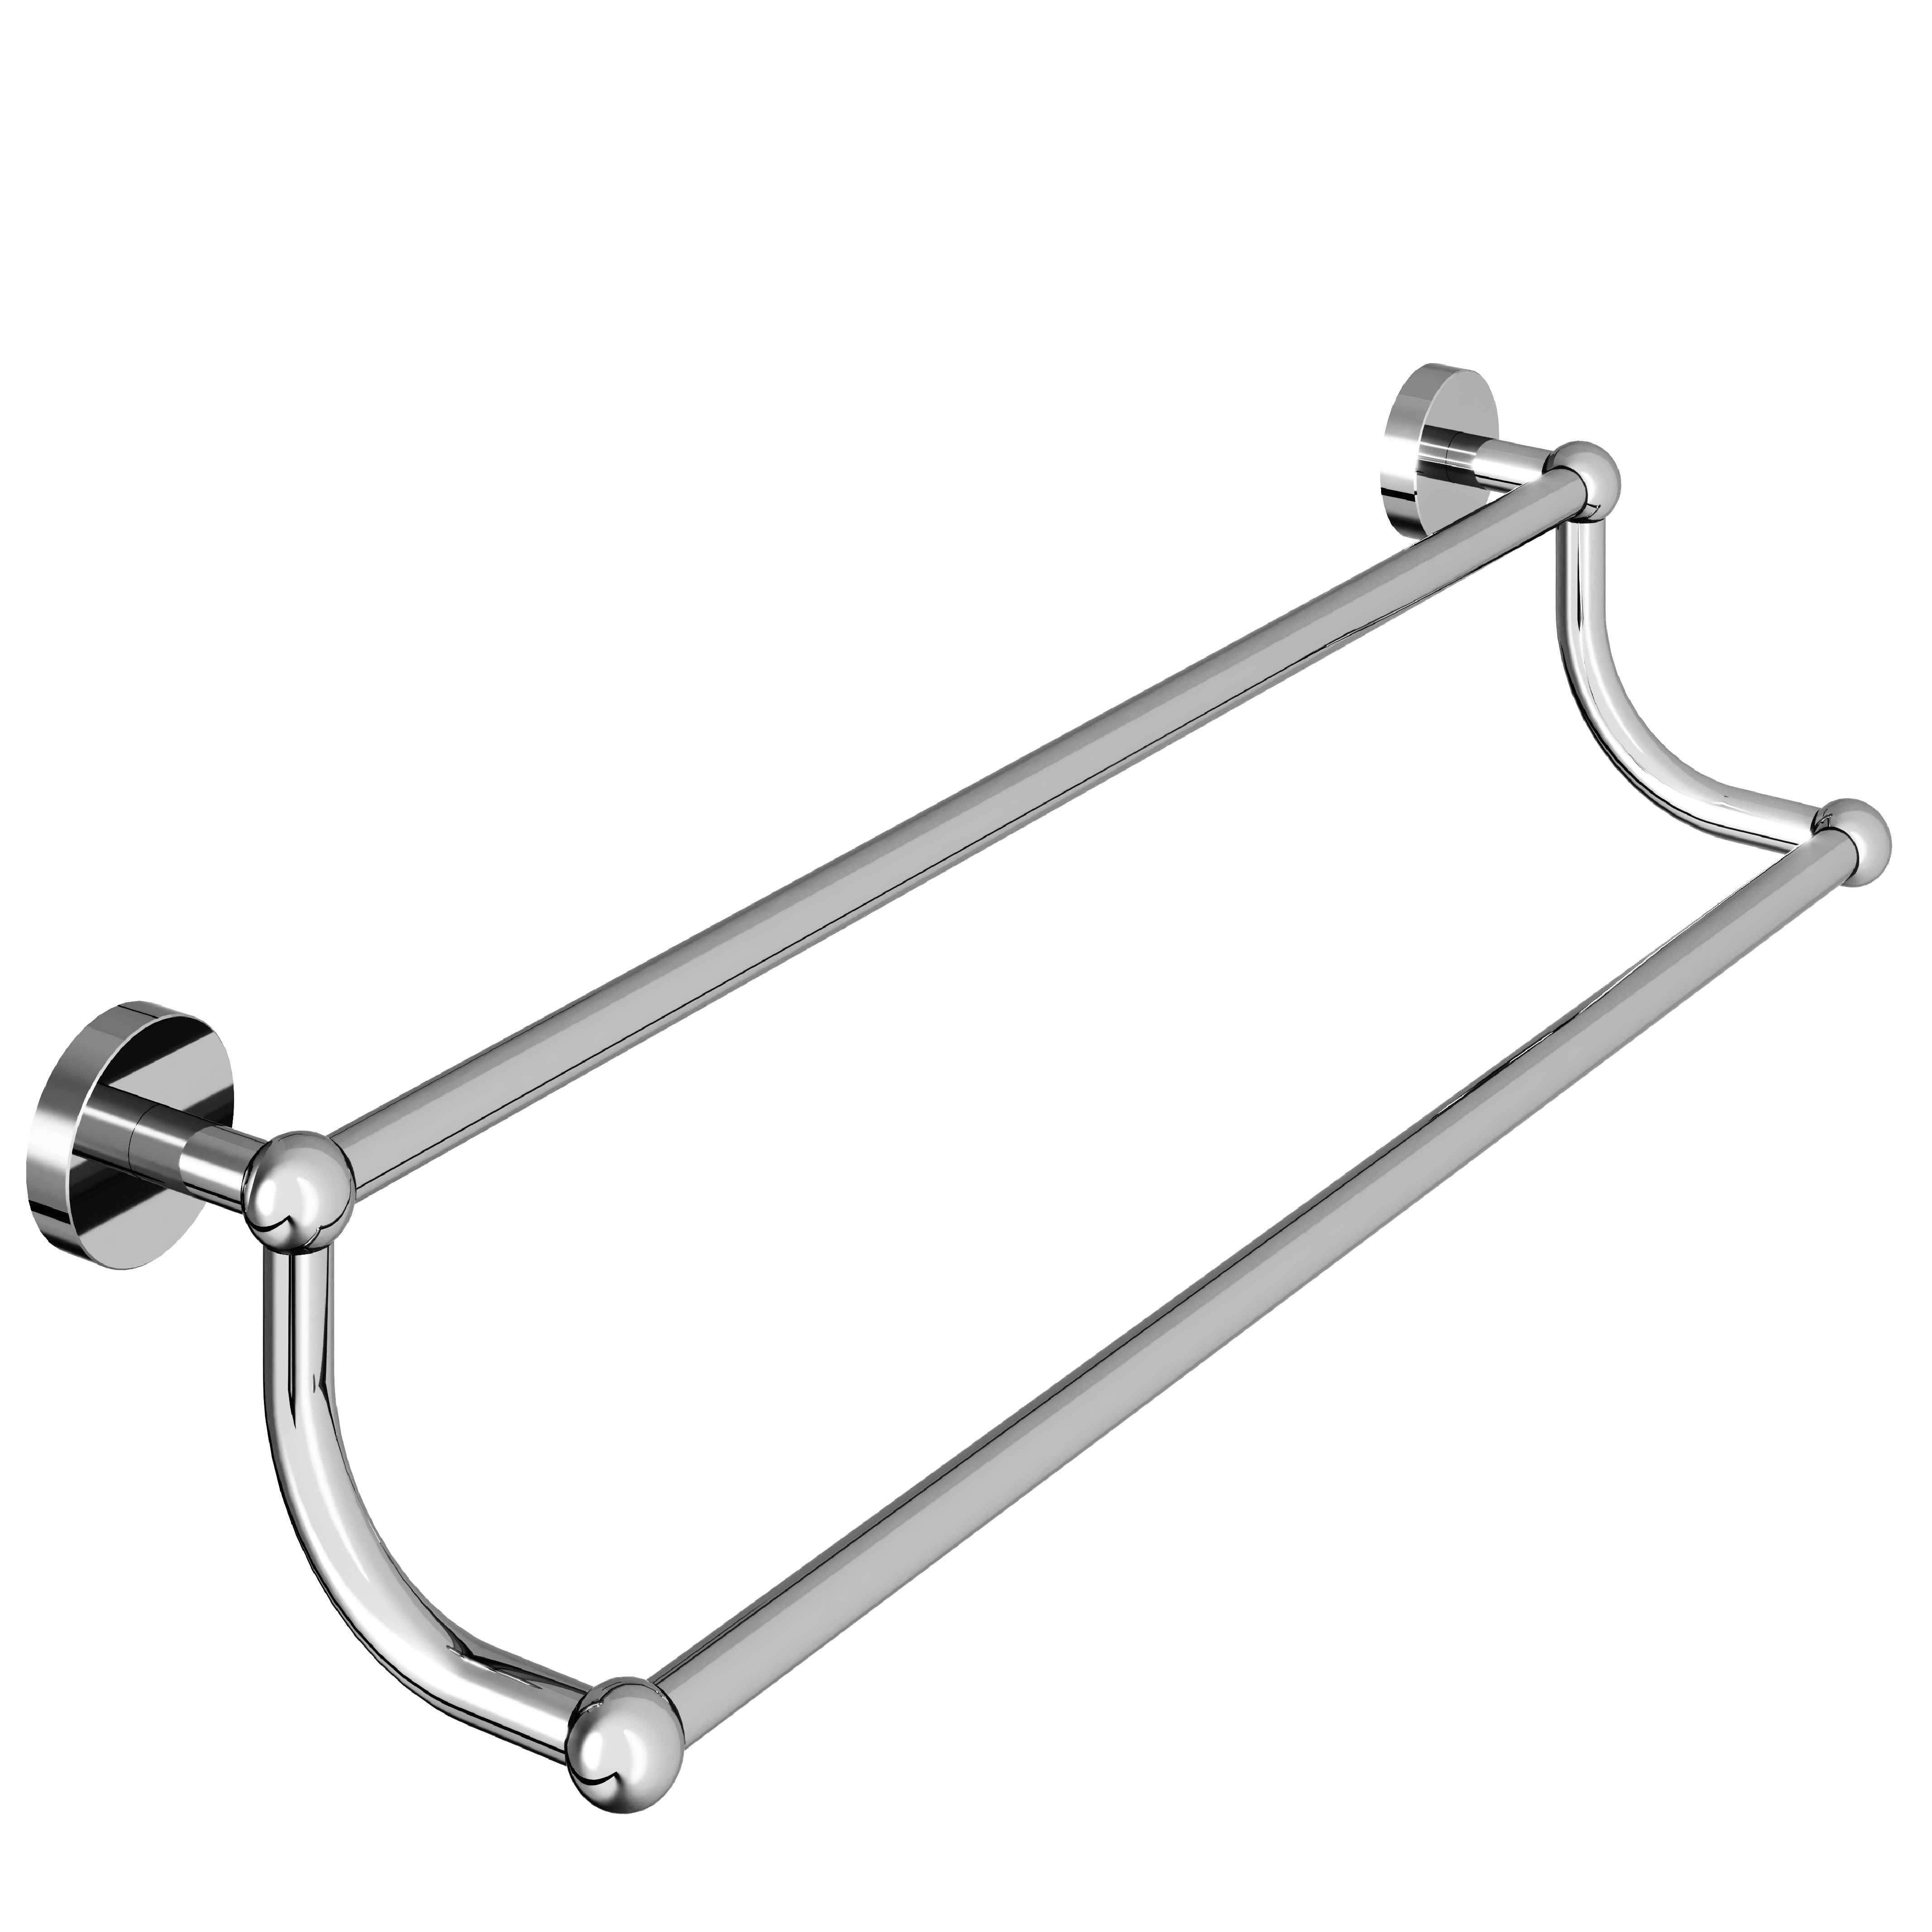 M90-509 Wall mounted double towel bar